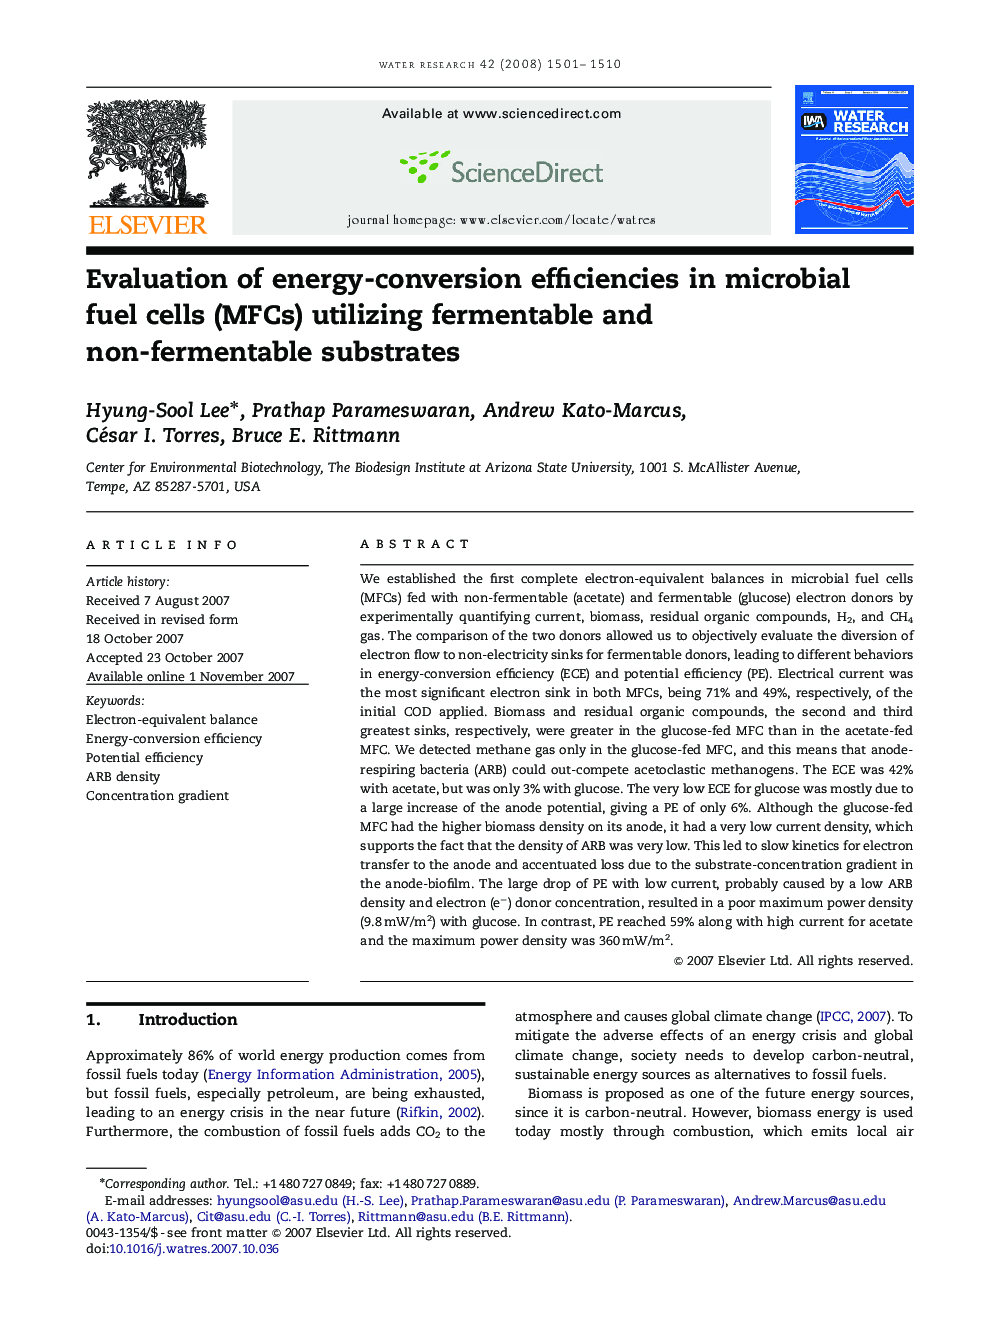 Evaluation of energy-conversion efficiencies in microbial fuel cells (MFCs) utilizing fermentable and non-fermentable substrates